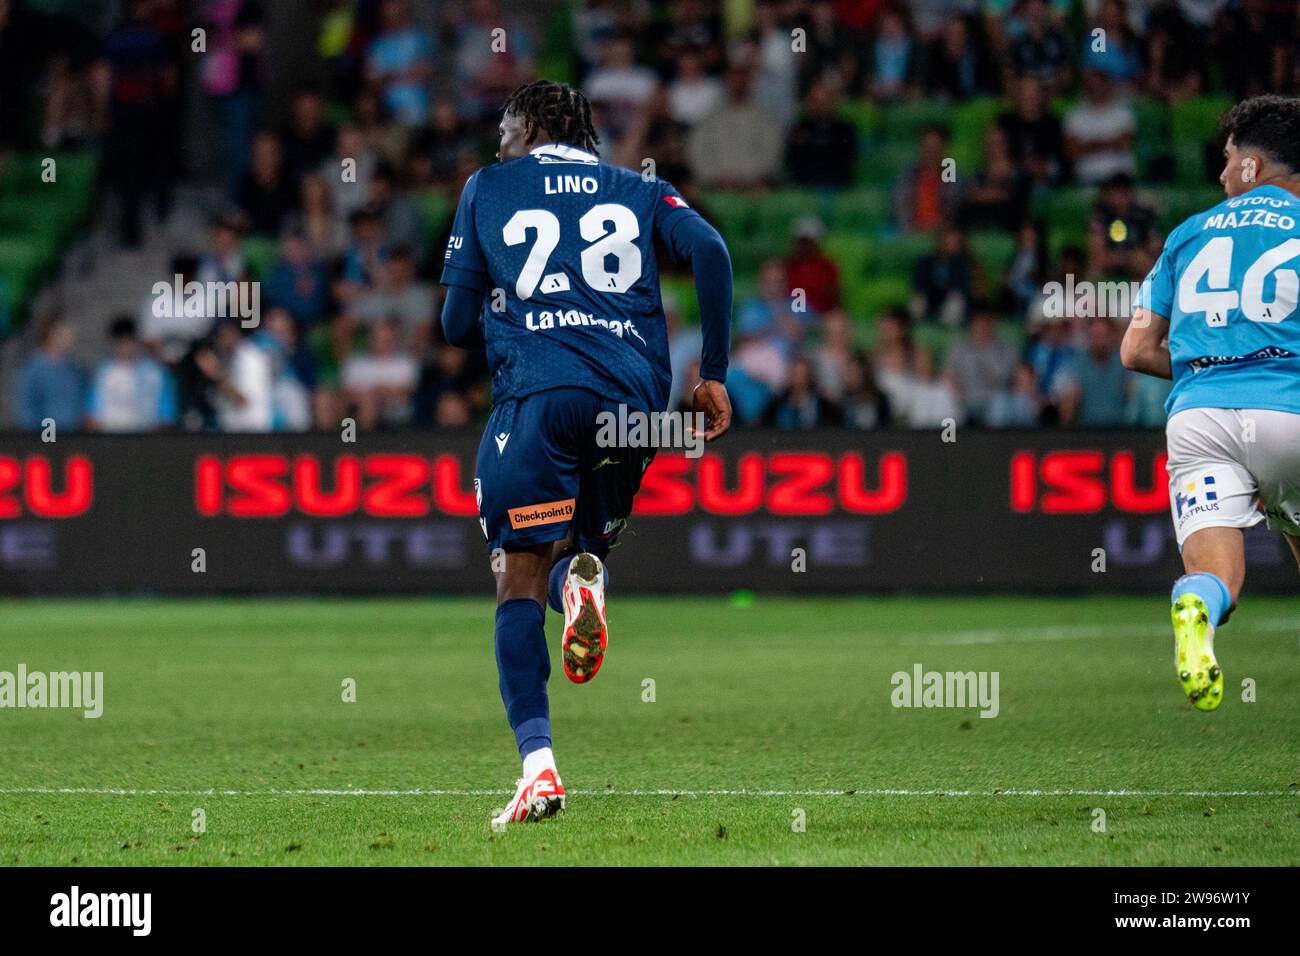 Melbourne, Australia. 23 December, 2023. Melbourne Victory FC Midfielder Franco Lino (#28) runs back into position to defend the upcoming counter attack during the Isuzu UTE A-League match between Melbourne City FC and Melbourne Victory FC at AAMI Park in Melbourne, Australia. Credit: James Forrester/Alamy Live News Stock Photo